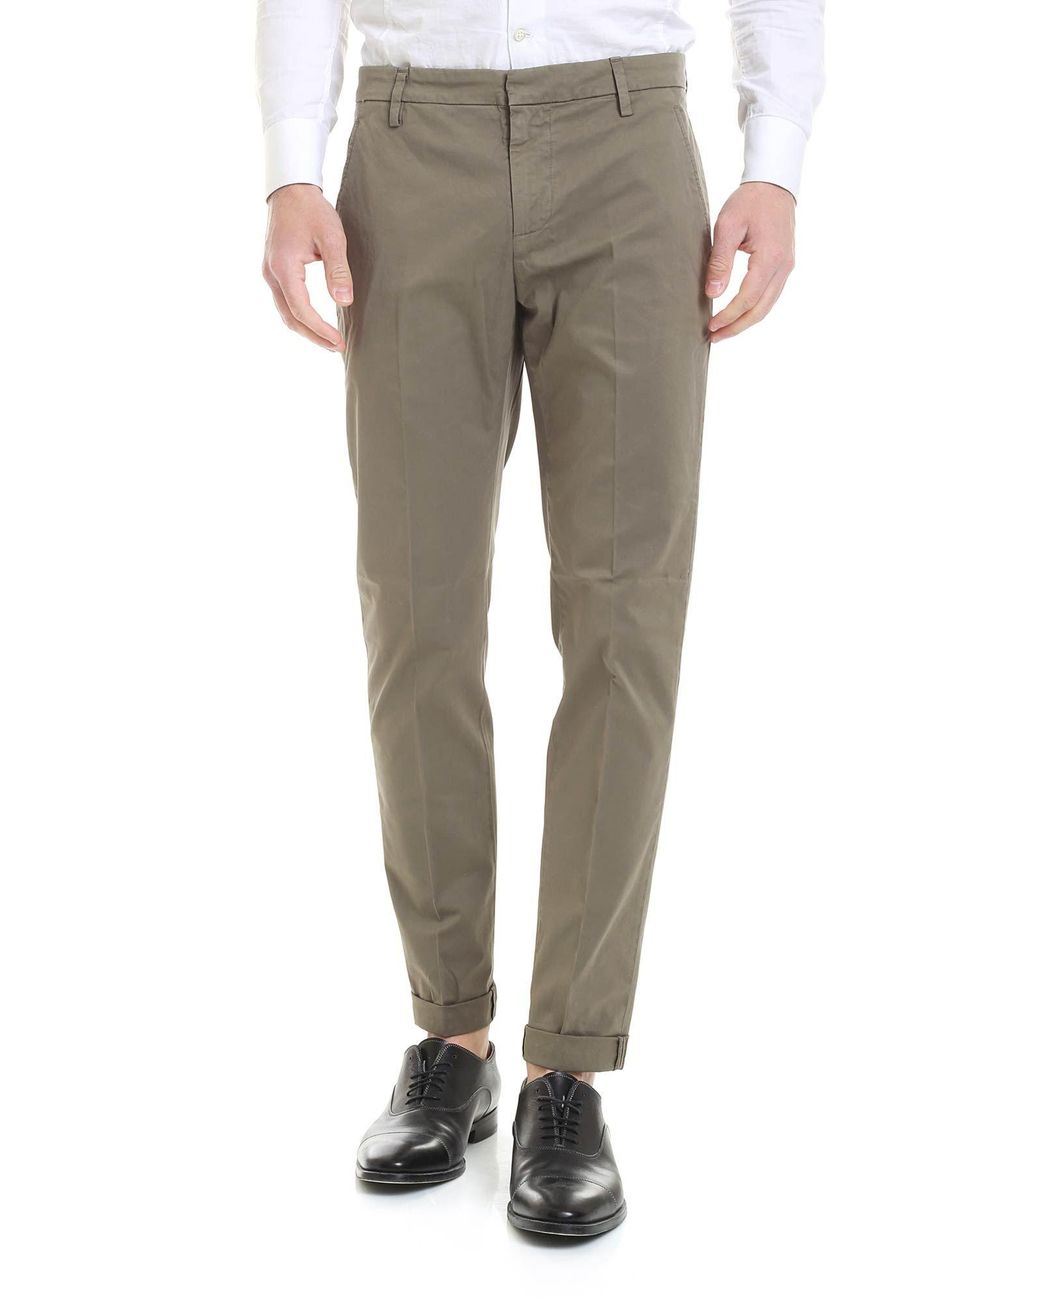 Dondup Cotton Gaubert Trousers In Olive Green for Men - Lyst